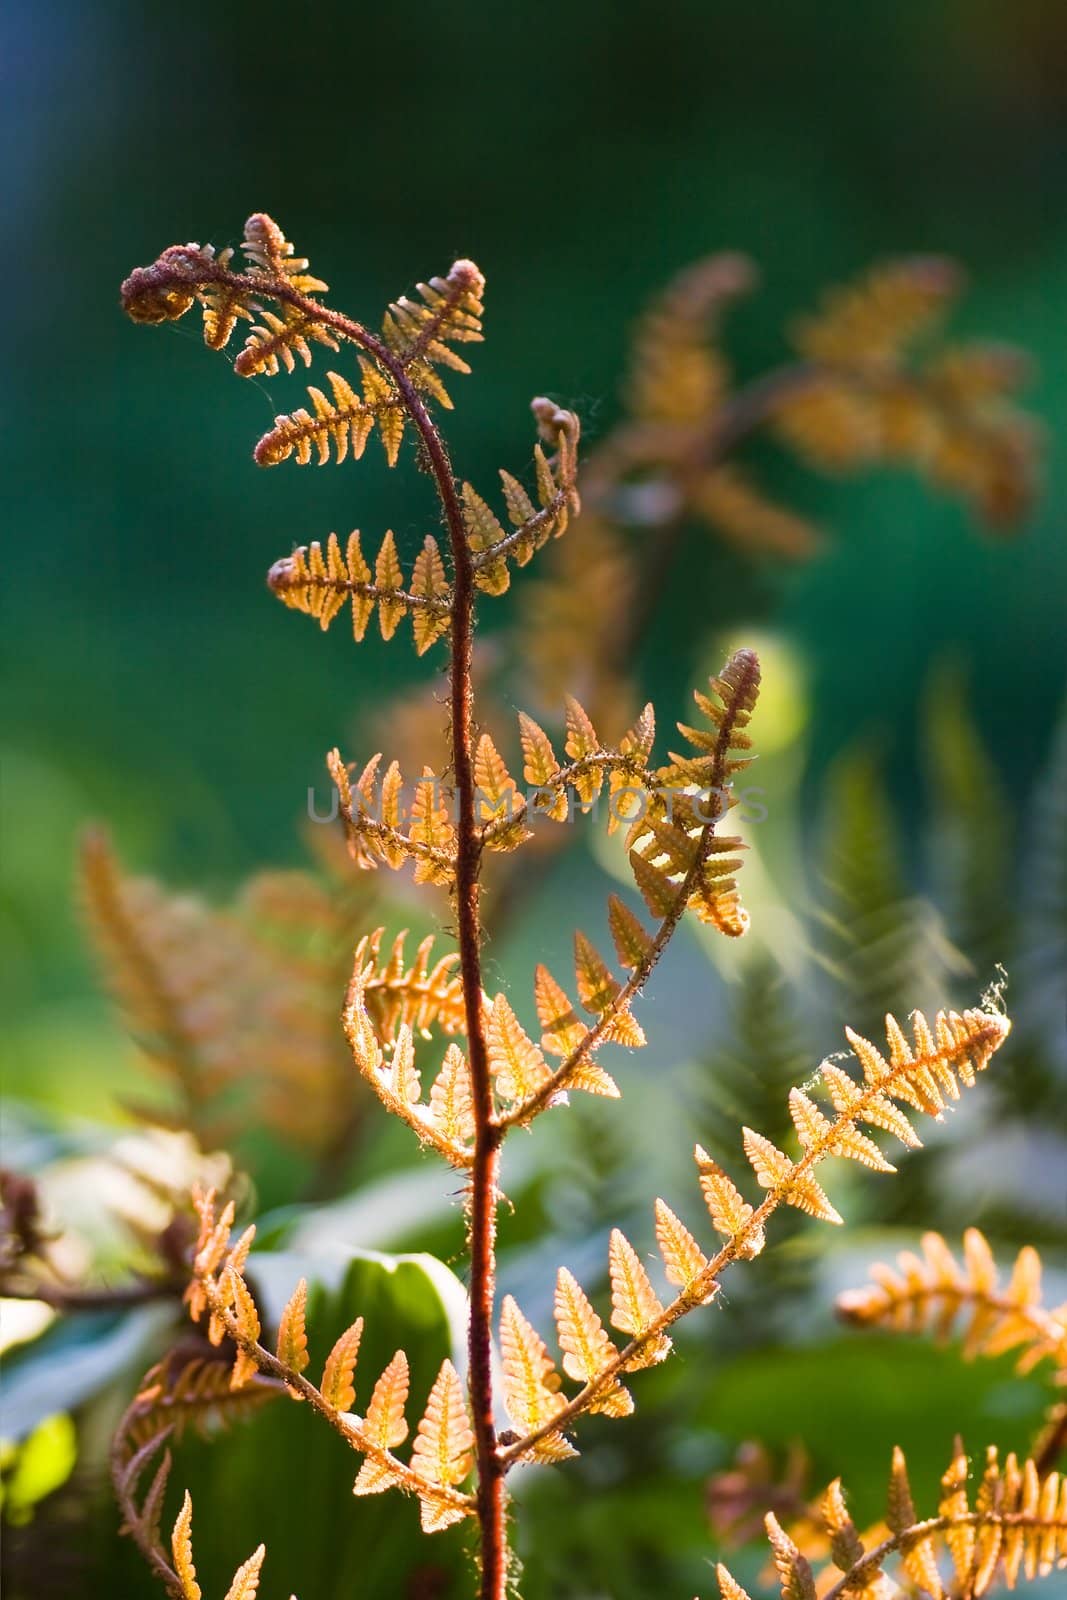 Young bronze-coloured leaf on fern in spring by Colette